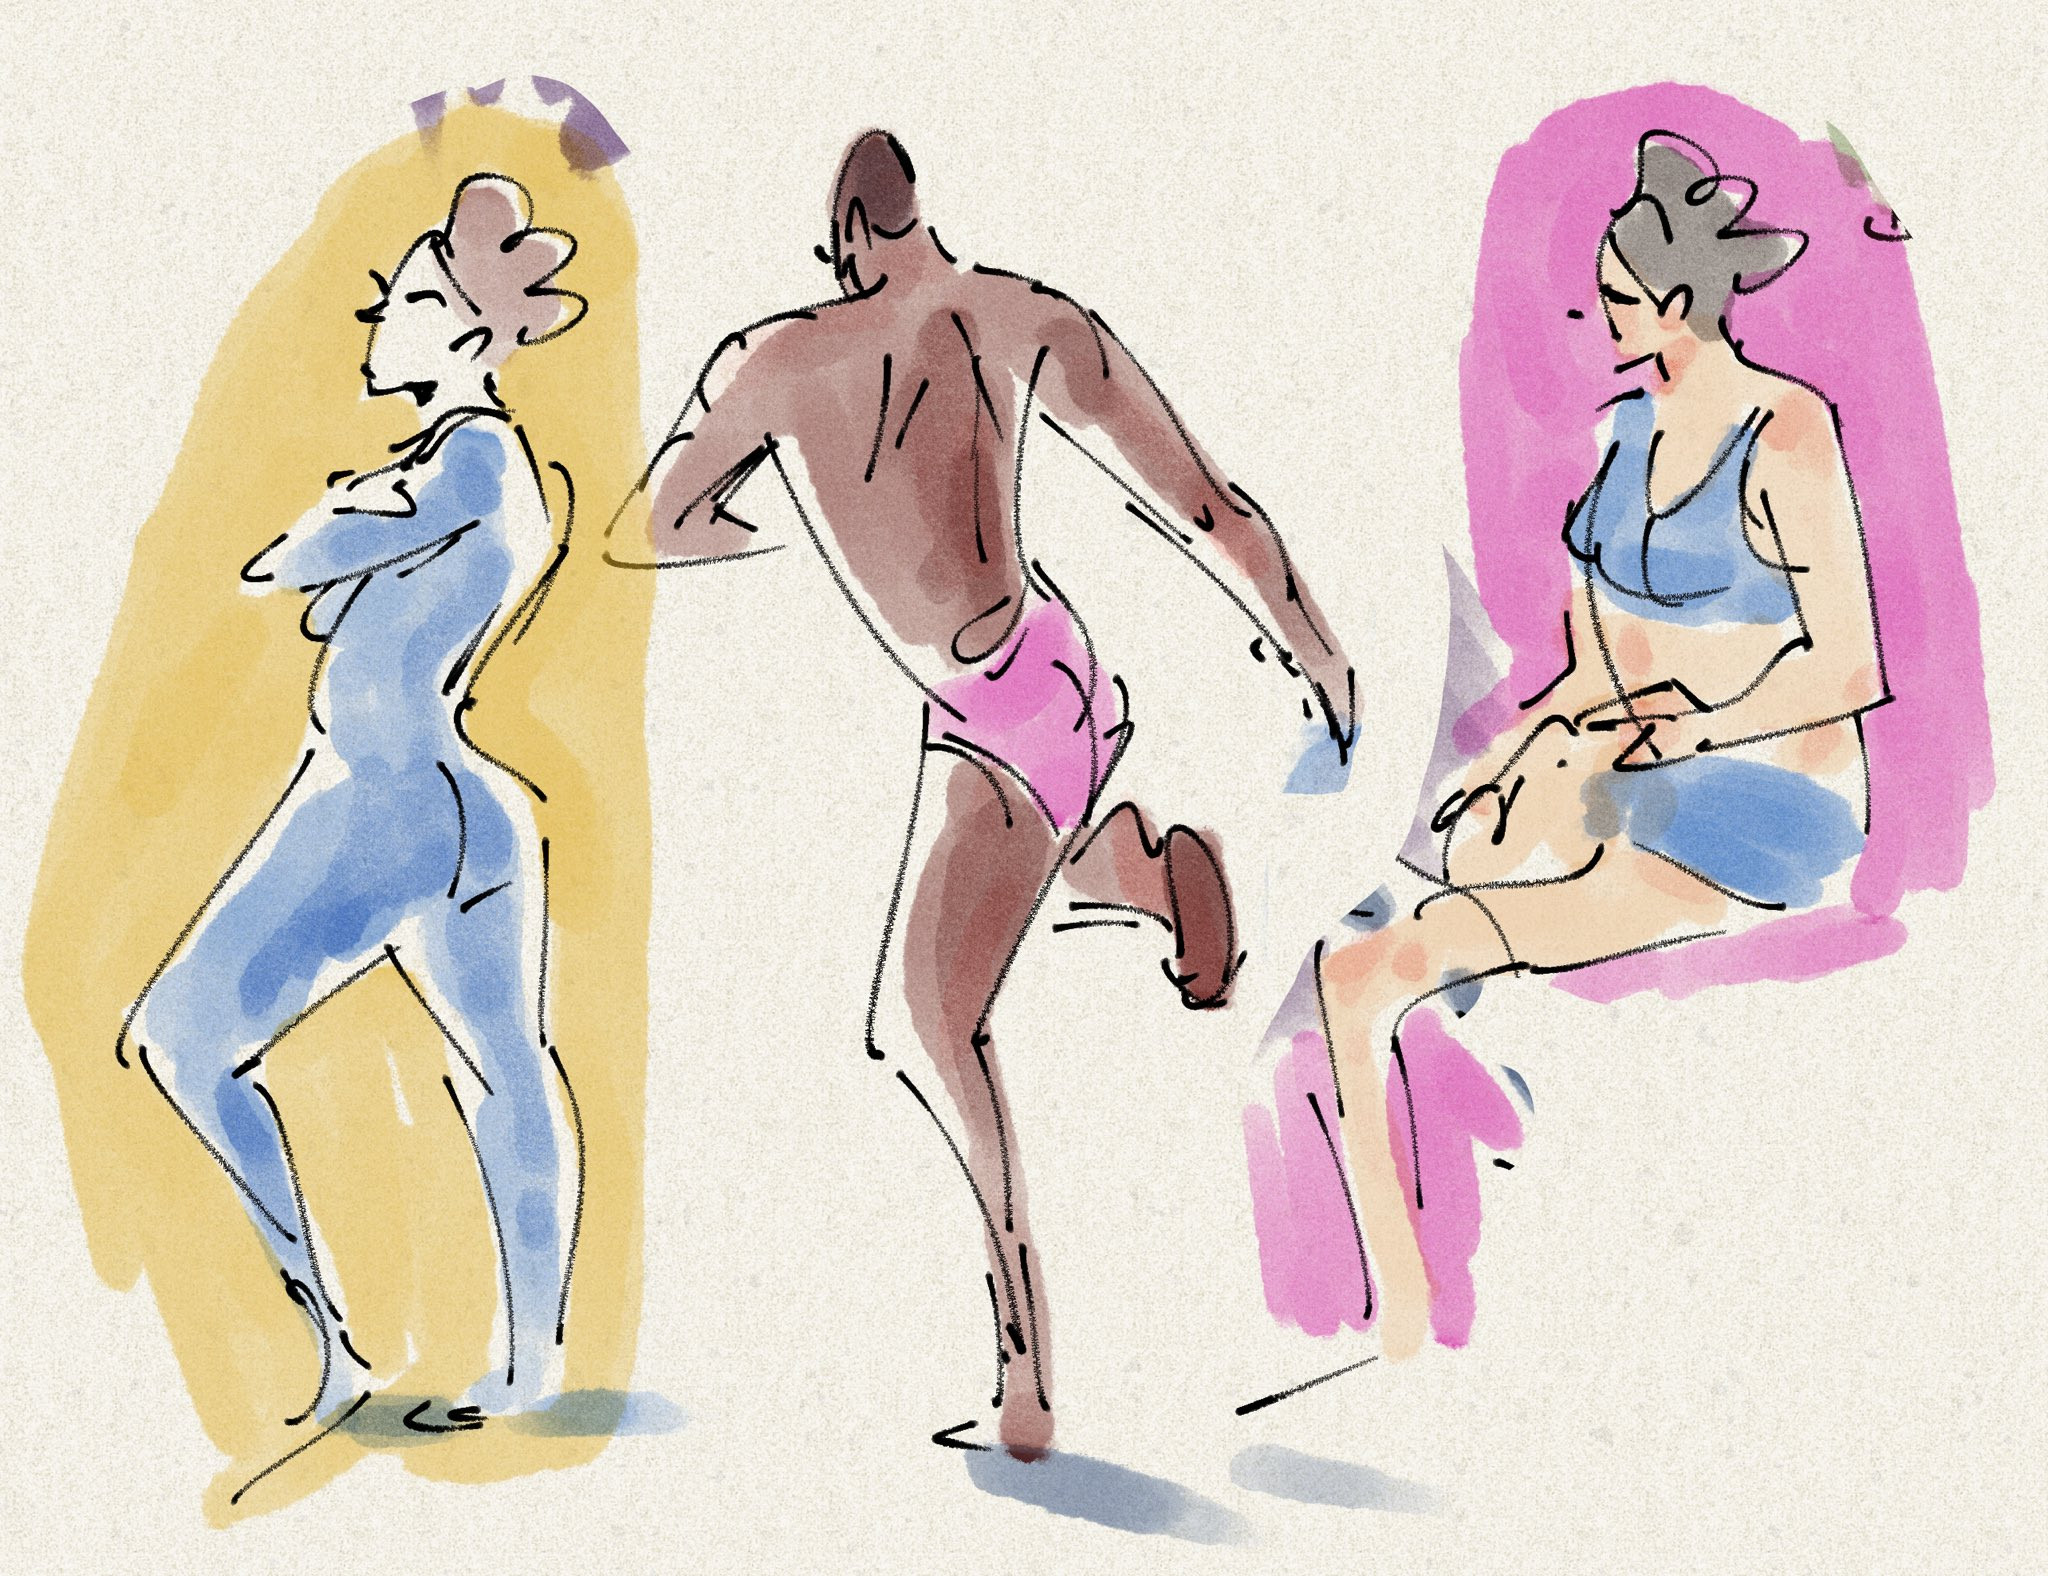 30 second gesture drawings w/color